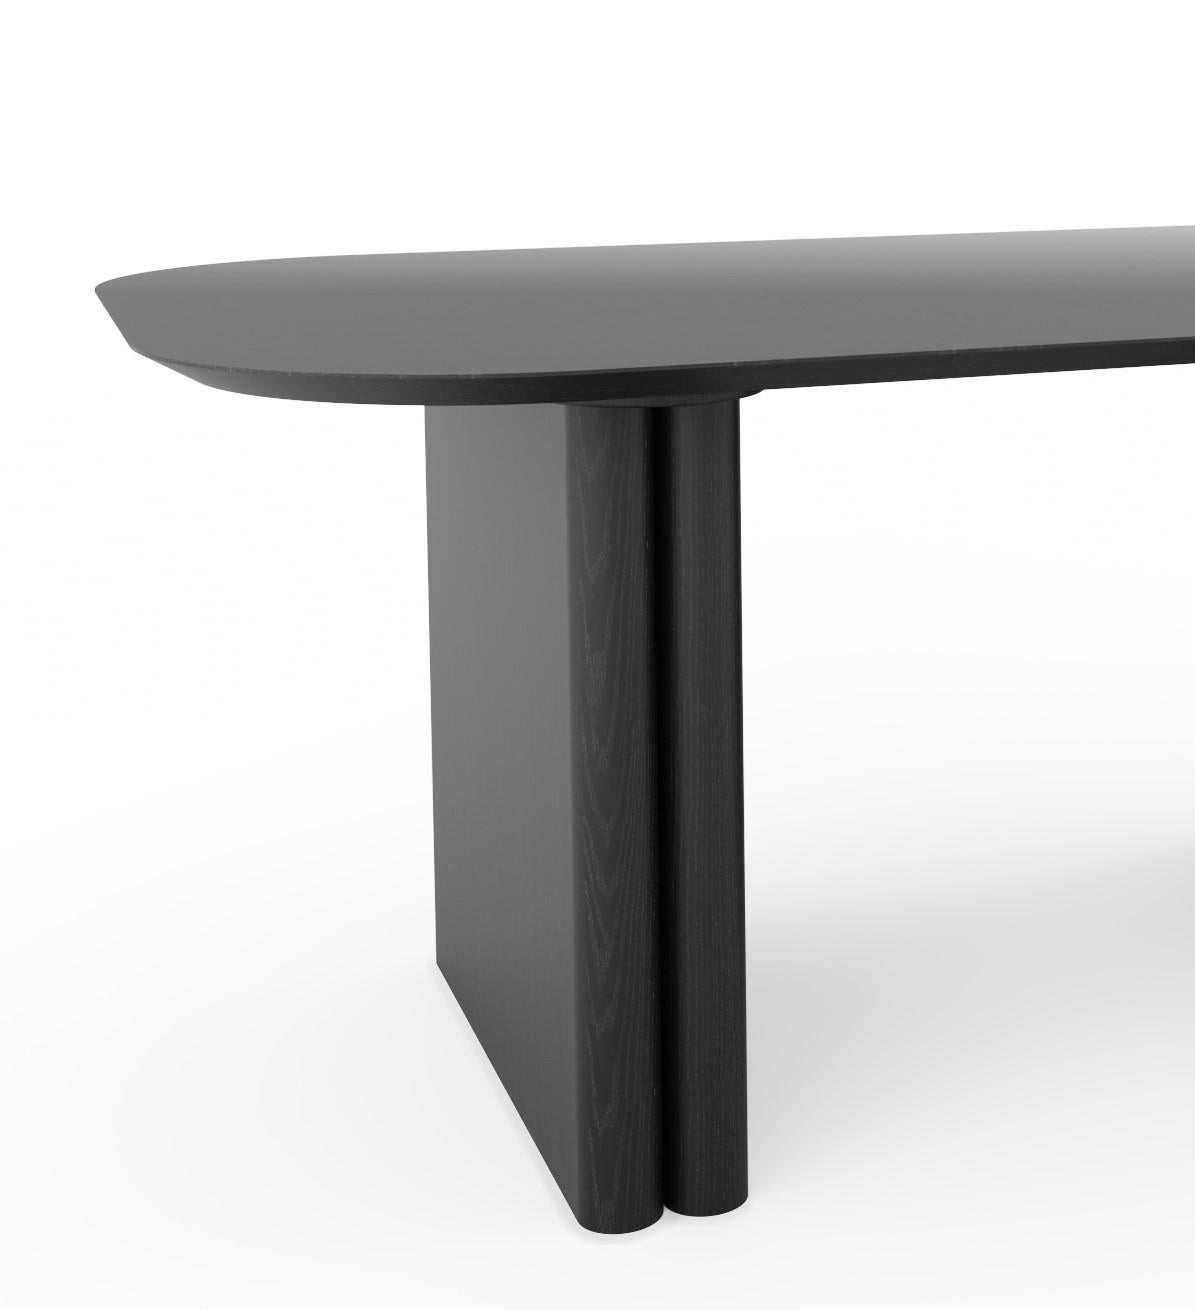 American Column Rectangular Table by Black Table Studio, Black, REP by Tuleste Factory  For Sale